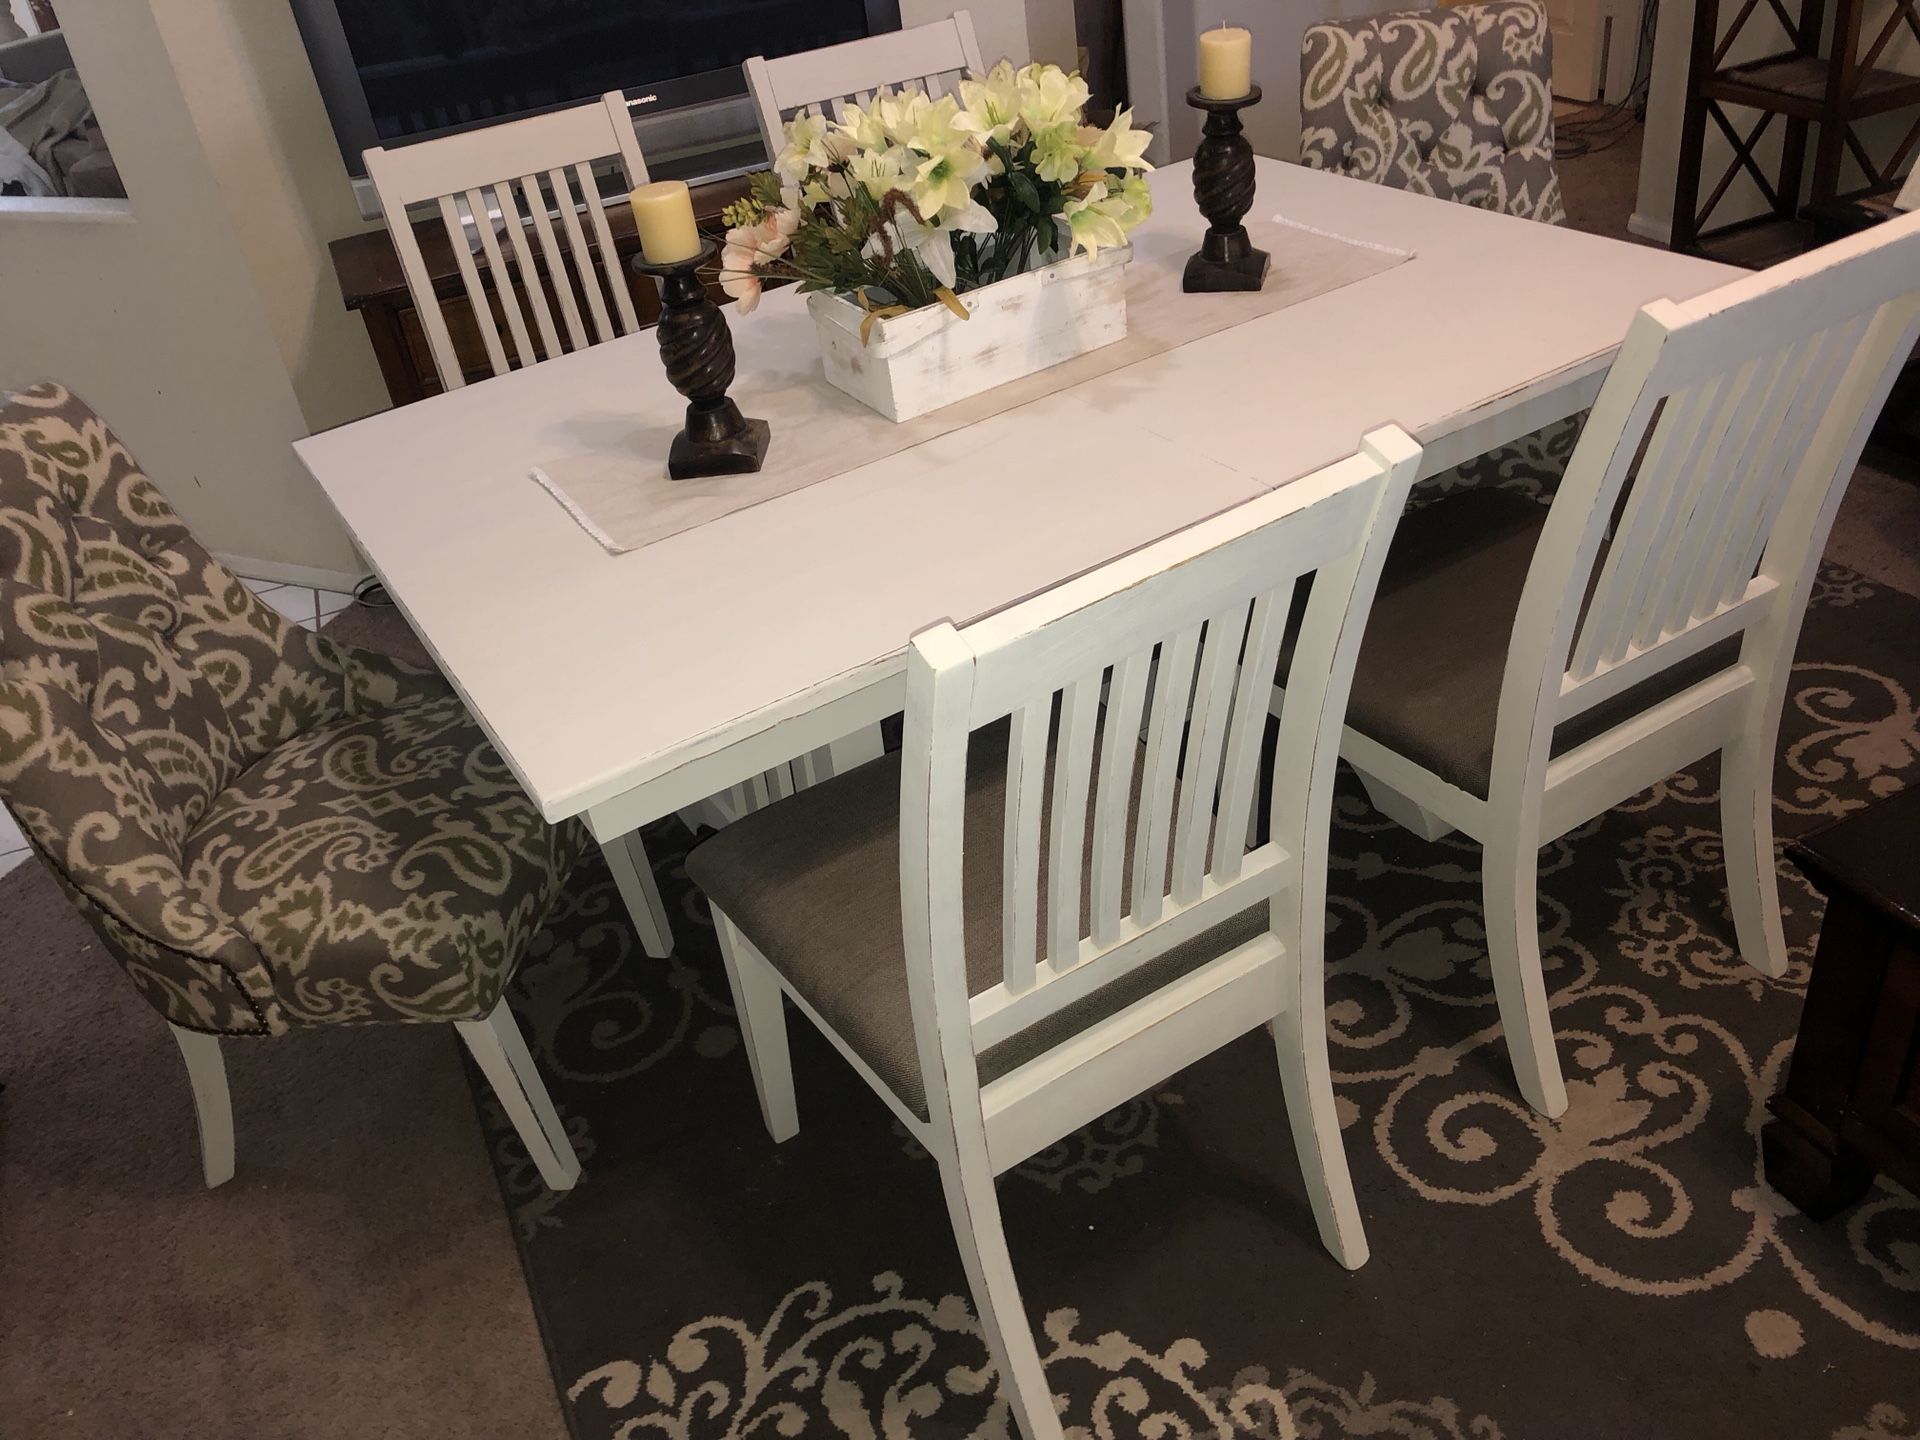 Dining table dinner table kitchen table dinning set farmhouse seats 6 six chairs off white wood